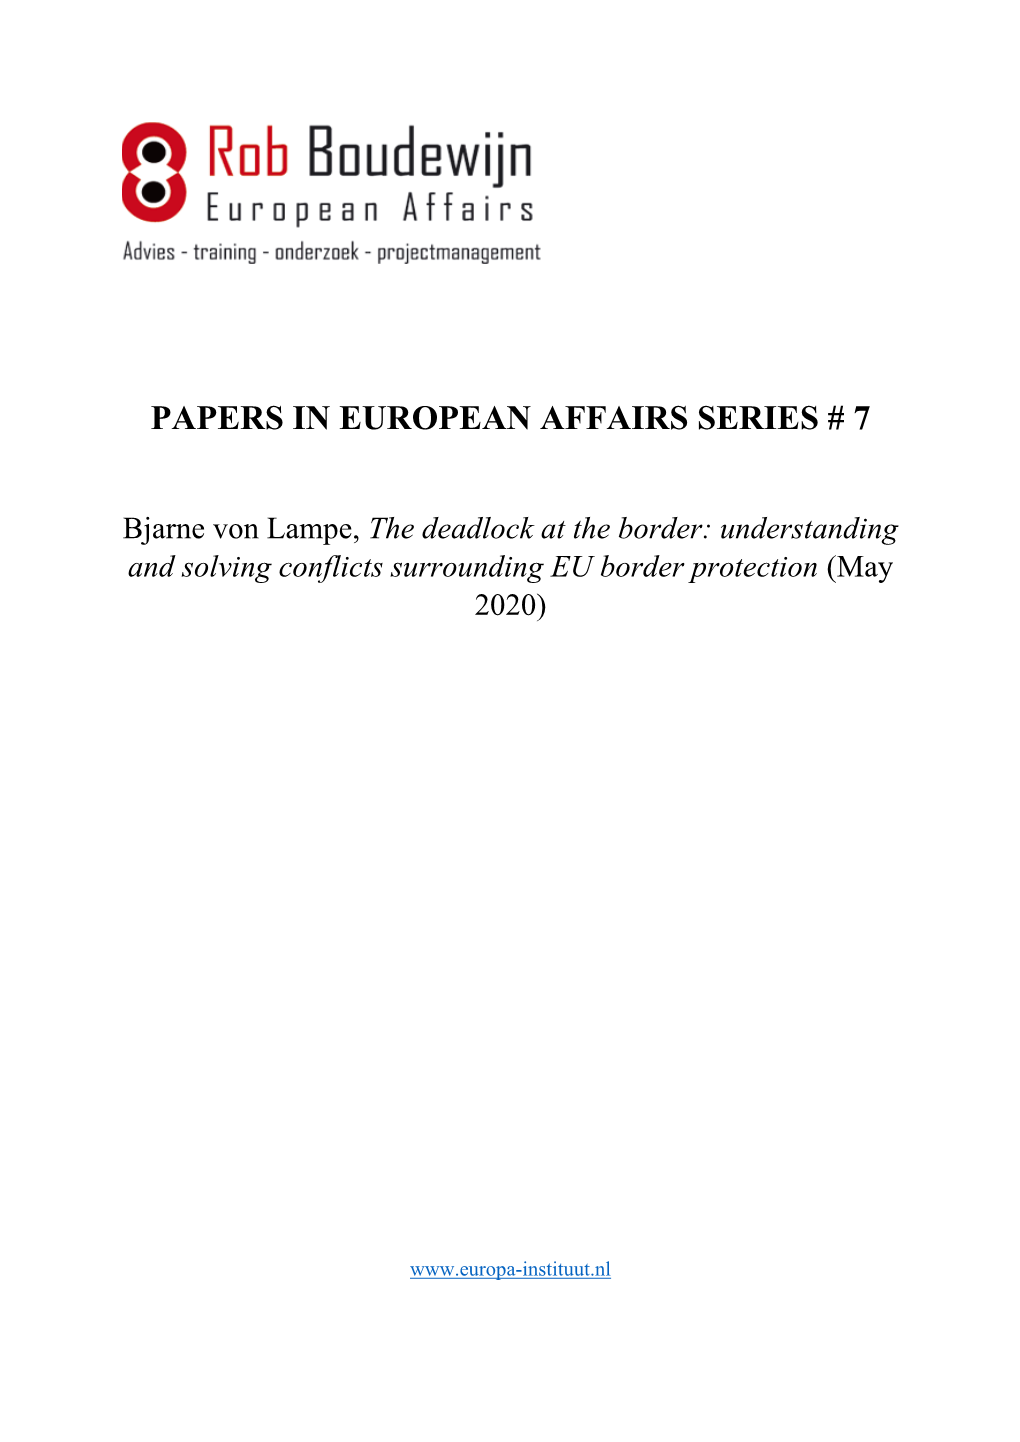 Papers in European Affairs Series # 7